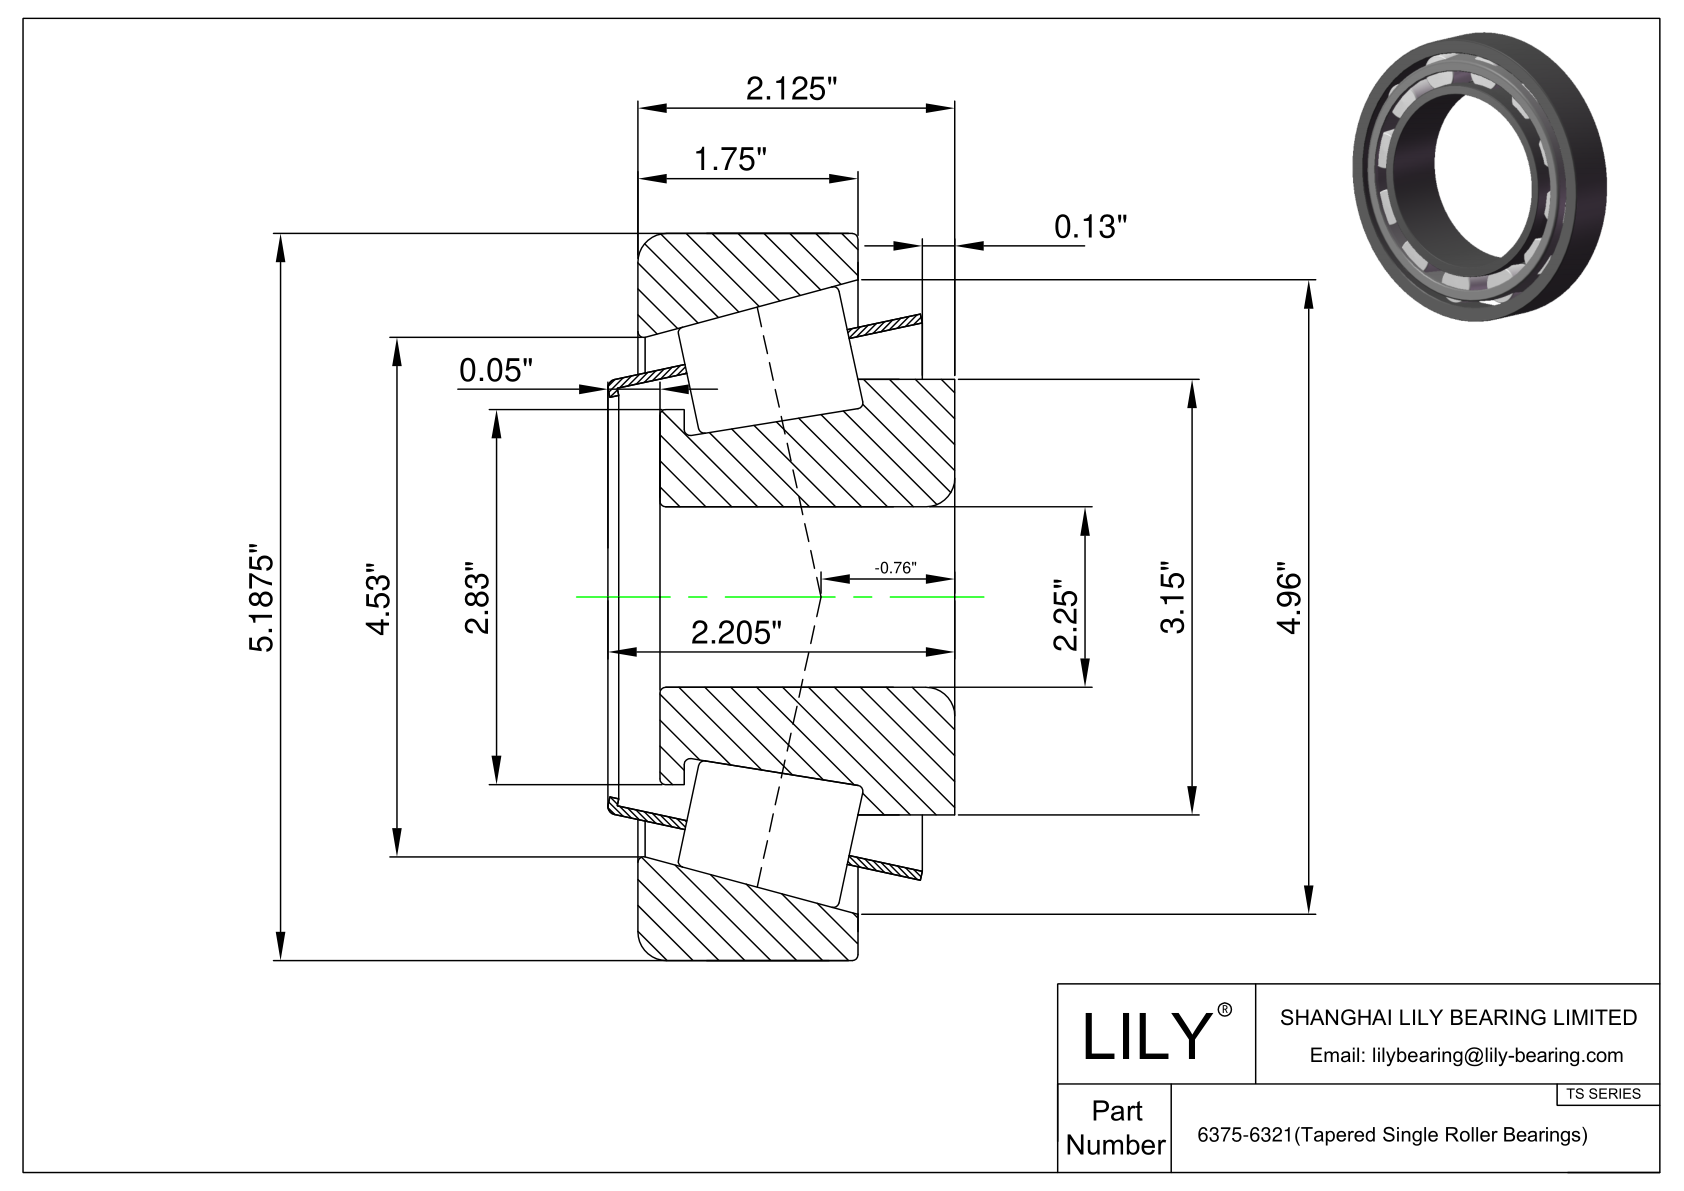 6375-6321 TS (Tapered Single Roller Bearings) (Imperial) cad drawing